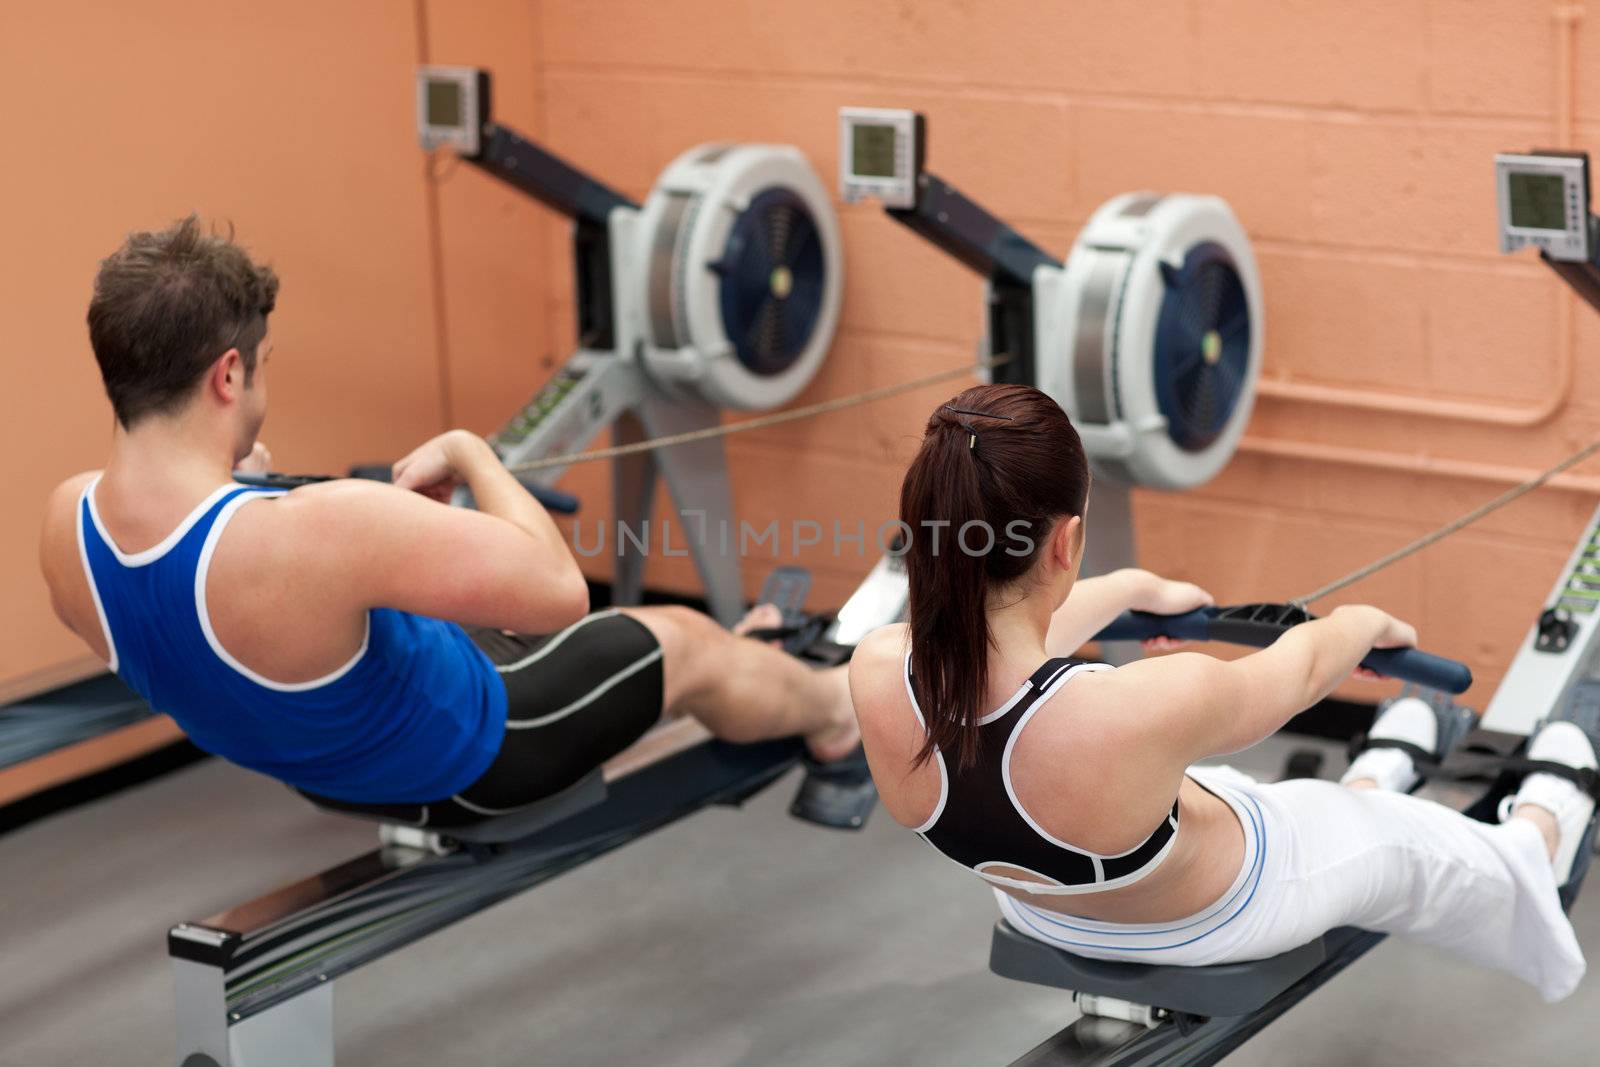 Concentrated people using a rower in a fitness center